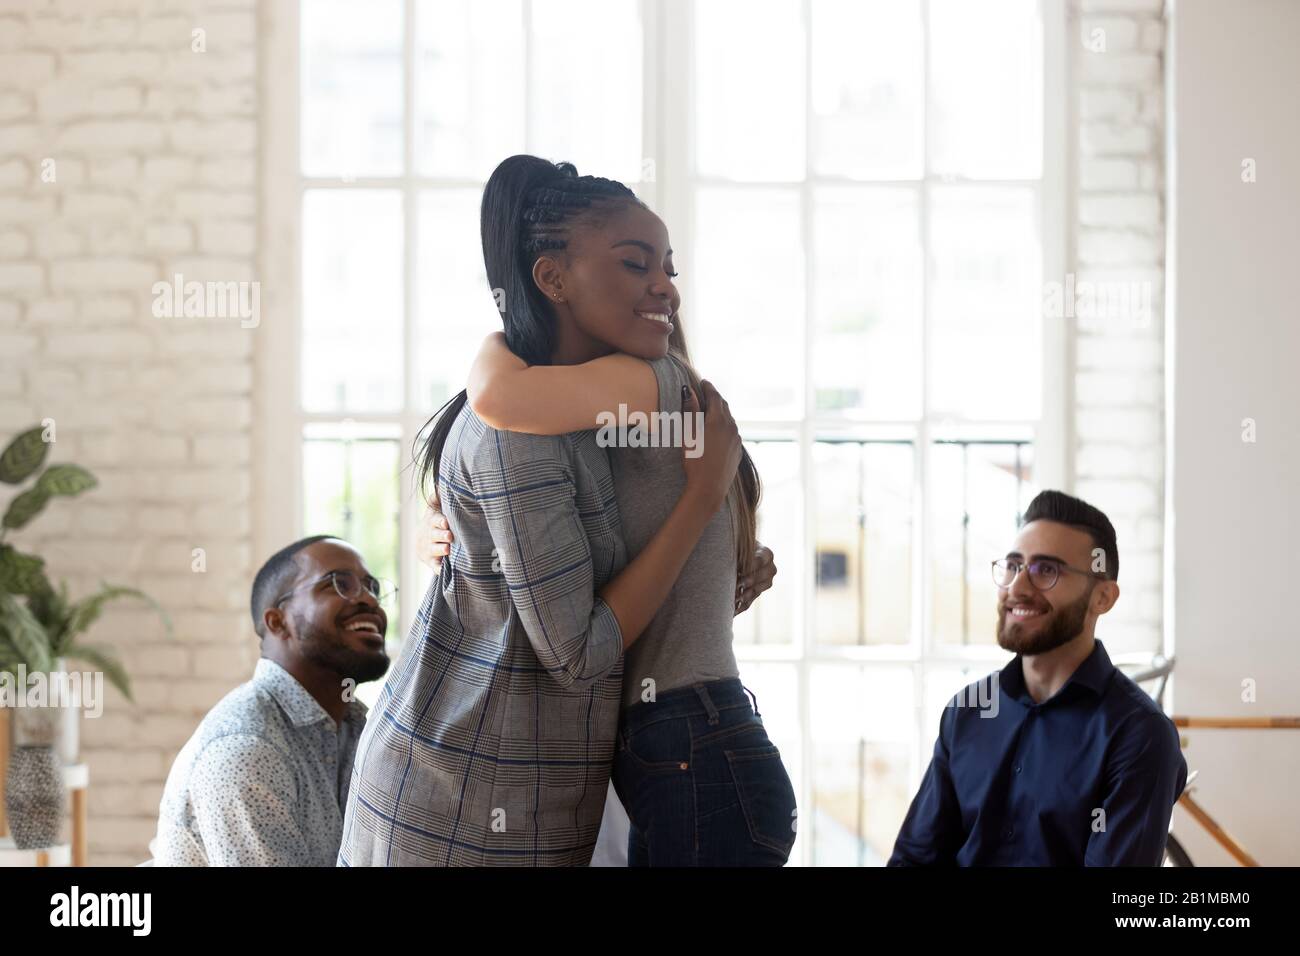 African woman psychologist embracing girl at group therapy session Stock Photo